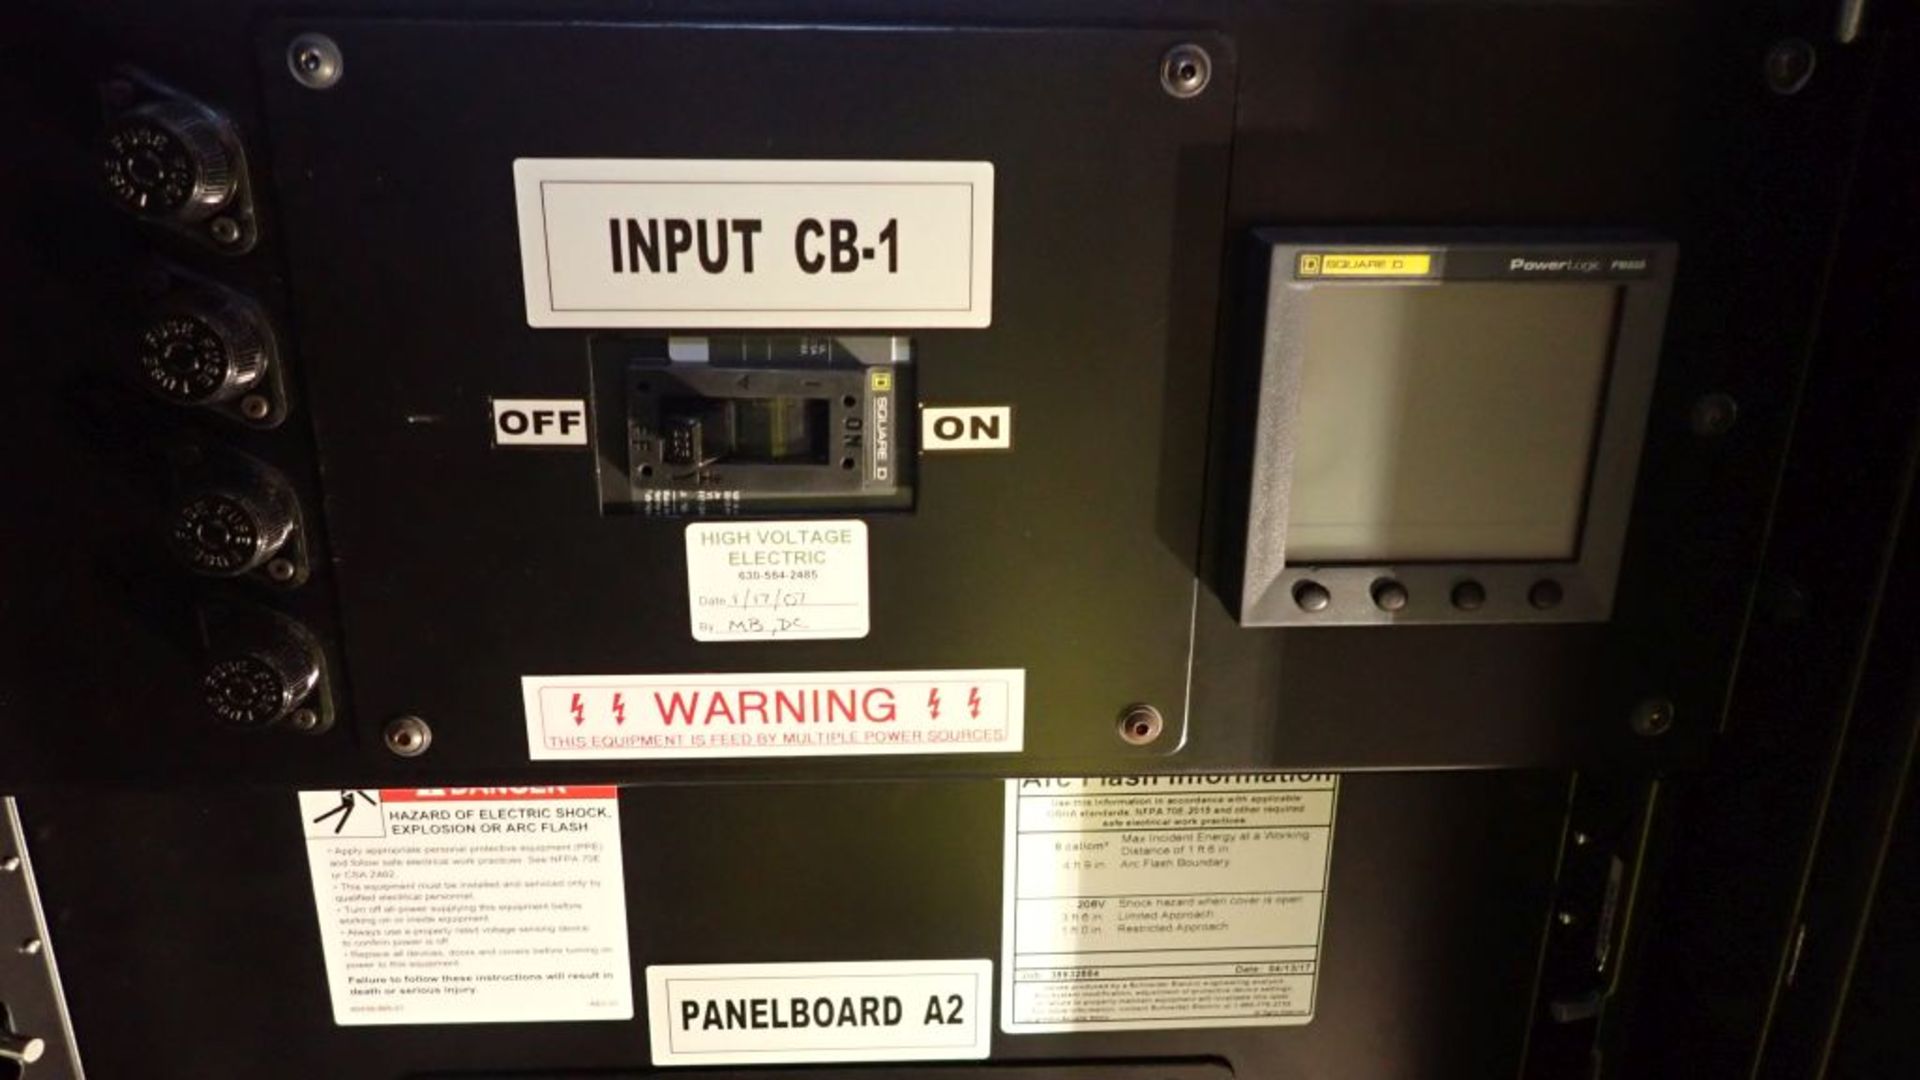 Onyx Power Rack Panelboard | Part No. 98-112-00-00; System 2; Input: 208/120 VAC; 4-Wire Plus Ground - Image 14 of 18